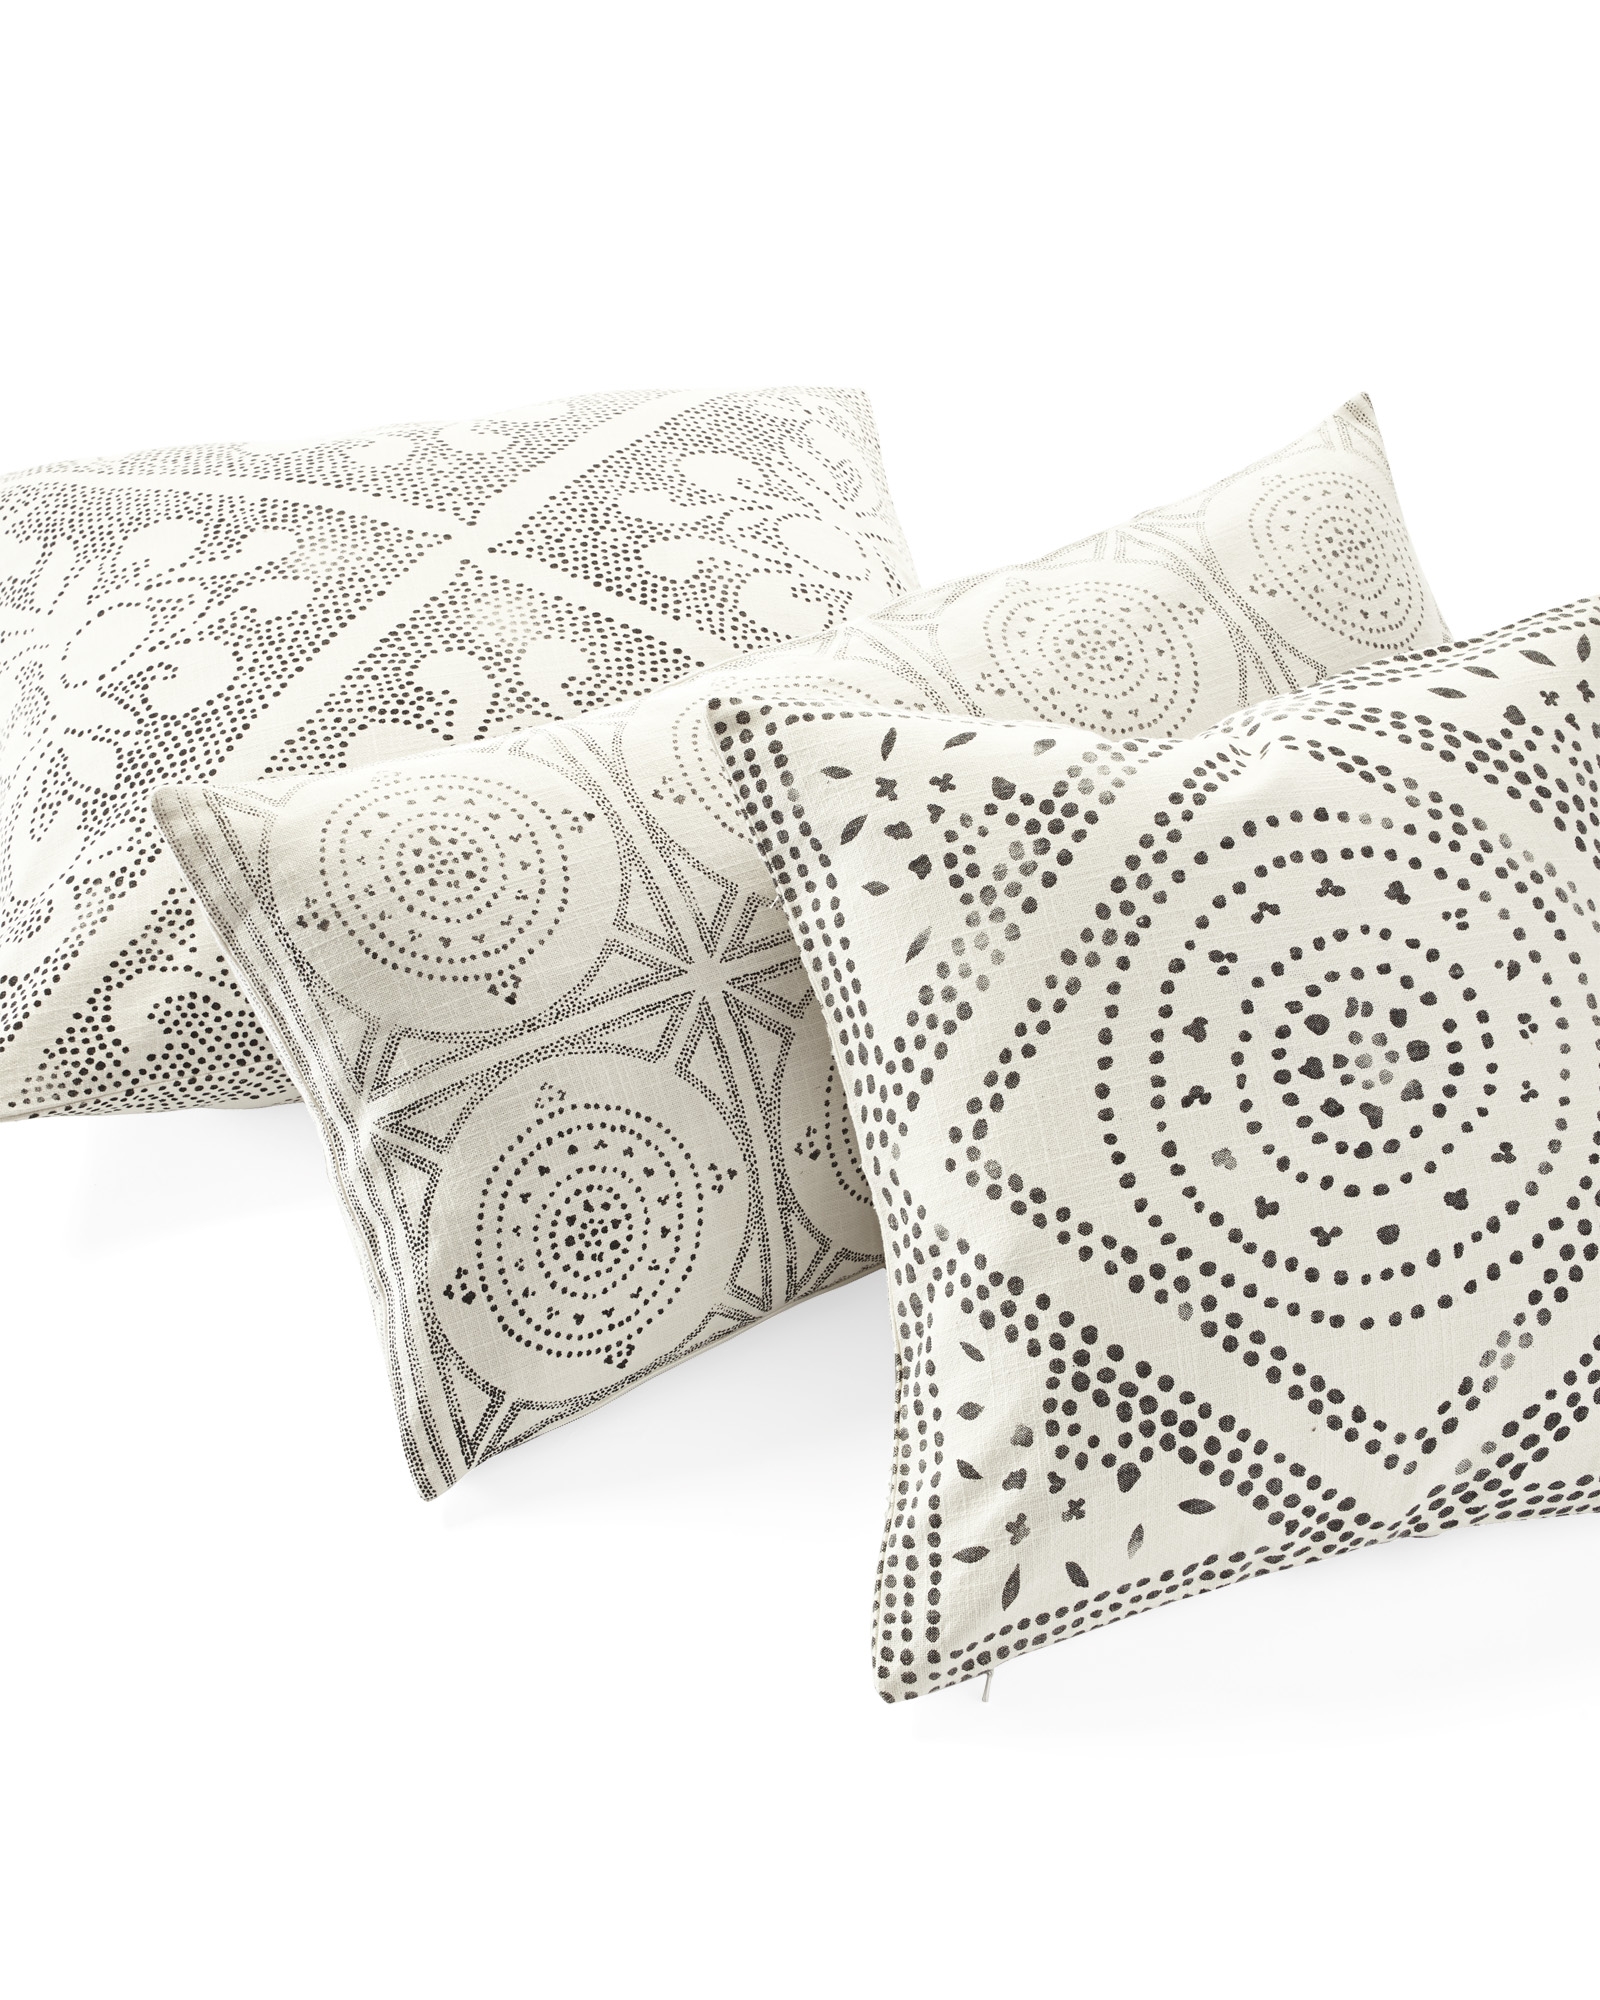 Camille Scroll Pillow Cover - Without Insert - Image 1